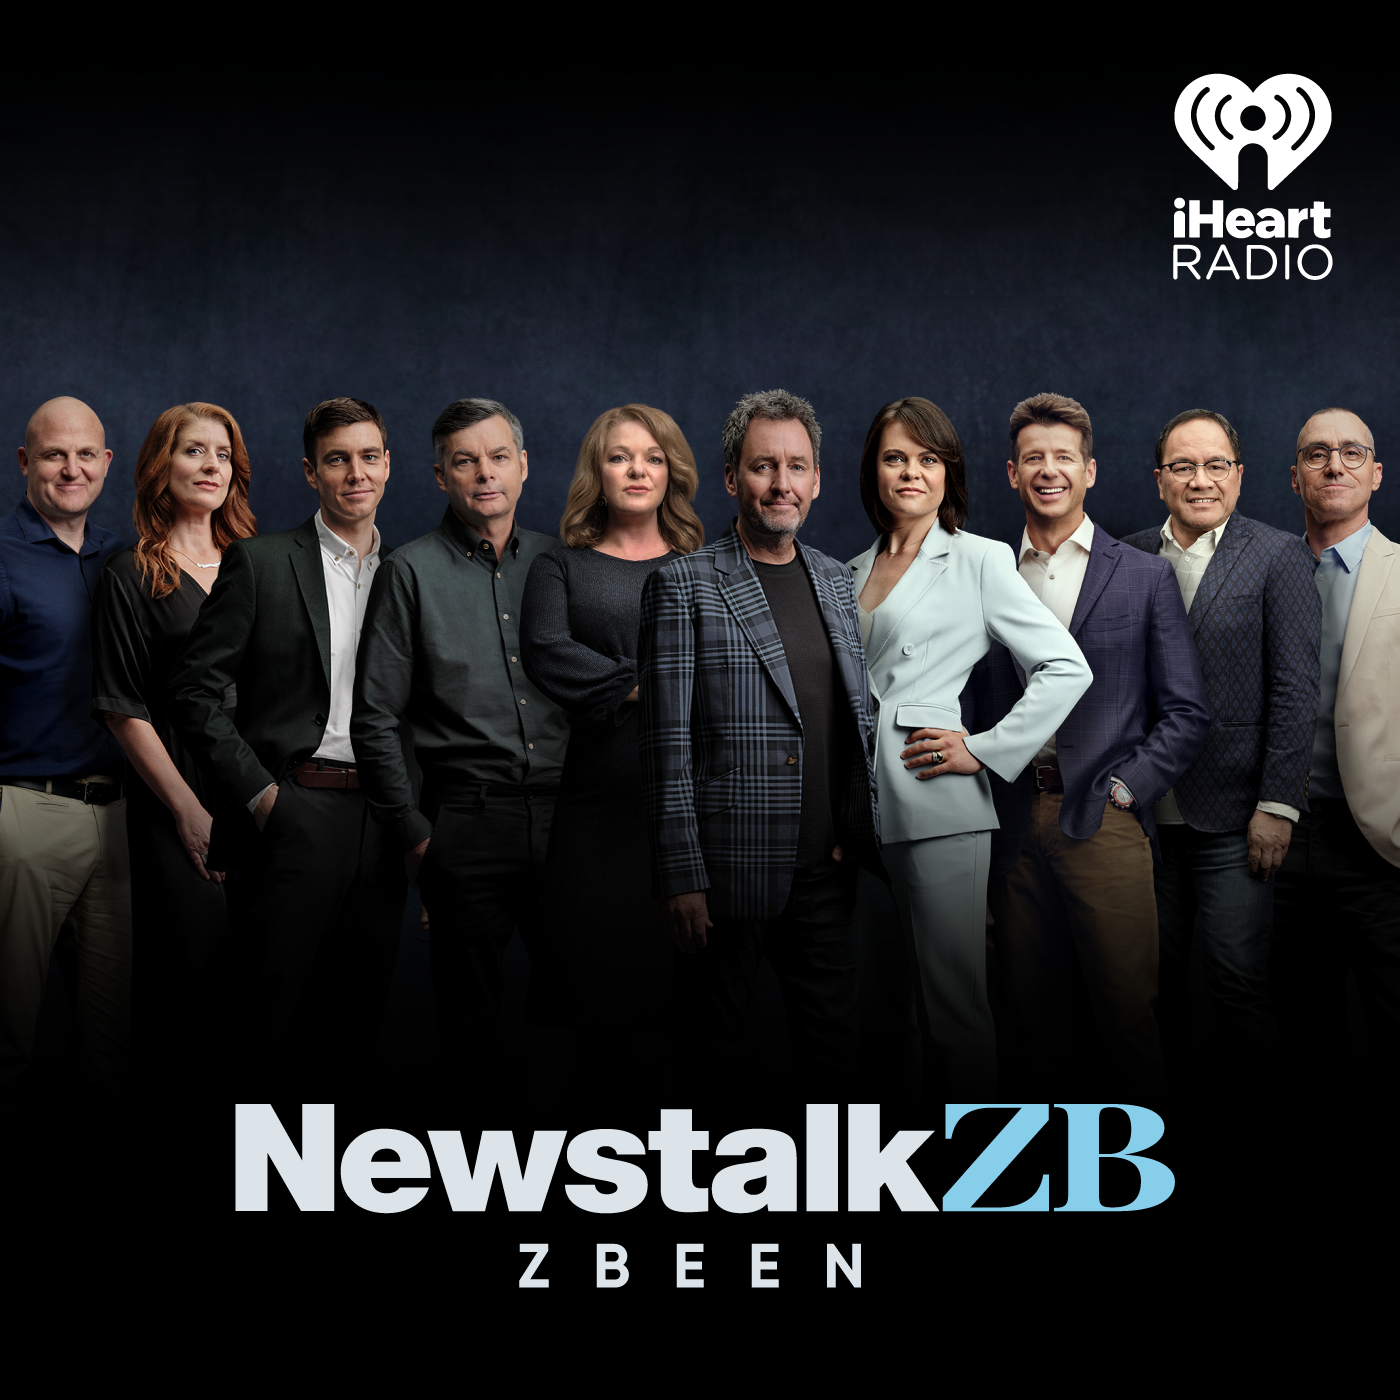 NEWSTALK ZBEEN: Today's the Big Day